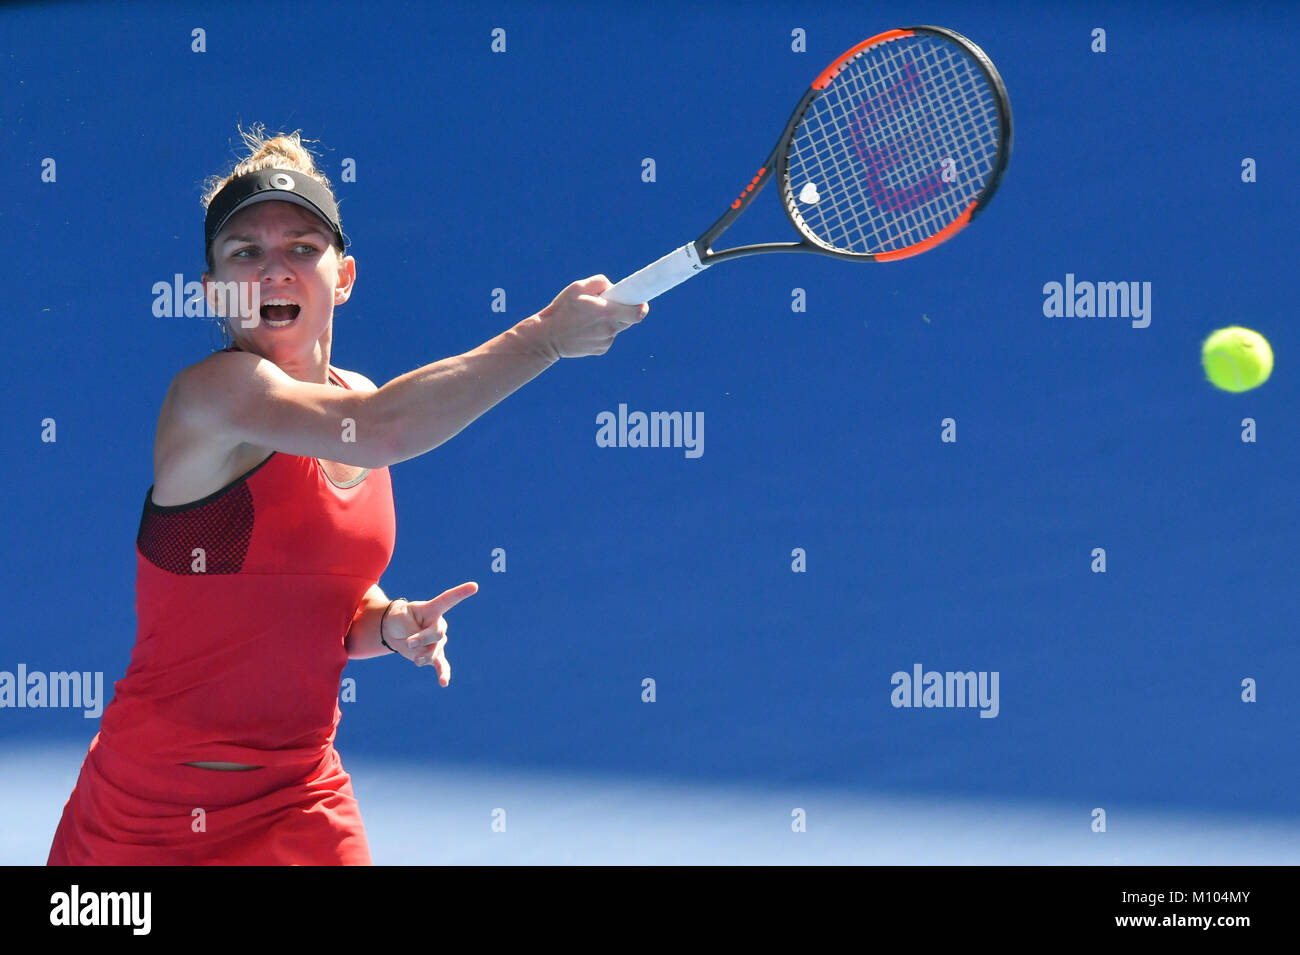 Melbourne, Australia. 25th Jan, 2018. Number one seed Simona Halep of Romania in action in a Semifinals match against 21st seed Angelique Kerber of Germany on day eleven of the 2018 Australian Open Grand Slam tennis tournament in Melbourne, Australia. Halep won 63 46 97. Sydney Low/Cal Sport Media/Alamy Live News Stock Photo